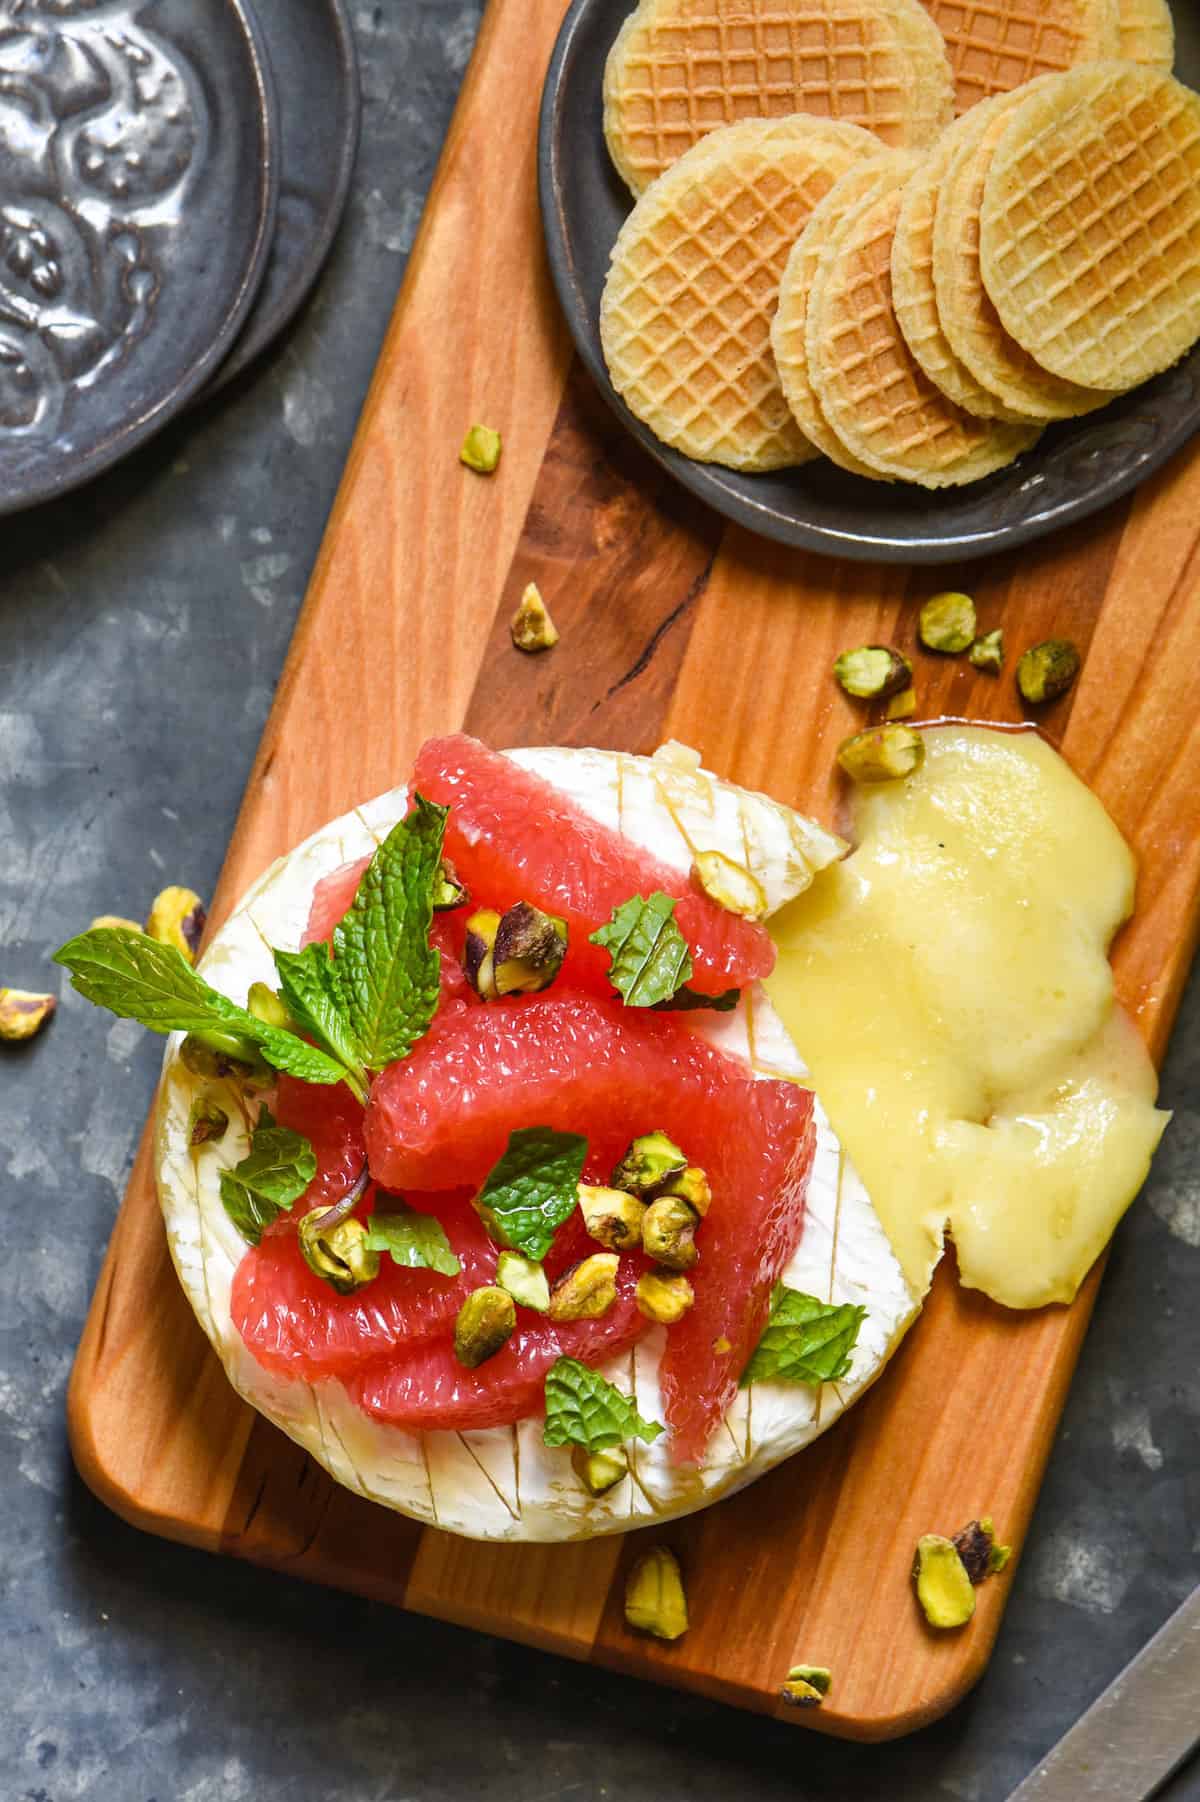 Easy Baked Brie with Grapefruit & Pistachios + 11 Grapefruit Recipes to Brighten Your Winter - Bring some happy flavor to a cold day with an appetizer, cocktail, breakfast, salad, lunch or dinner celebrating juicy, sweet grapefruit! | foxeslovelemons.com